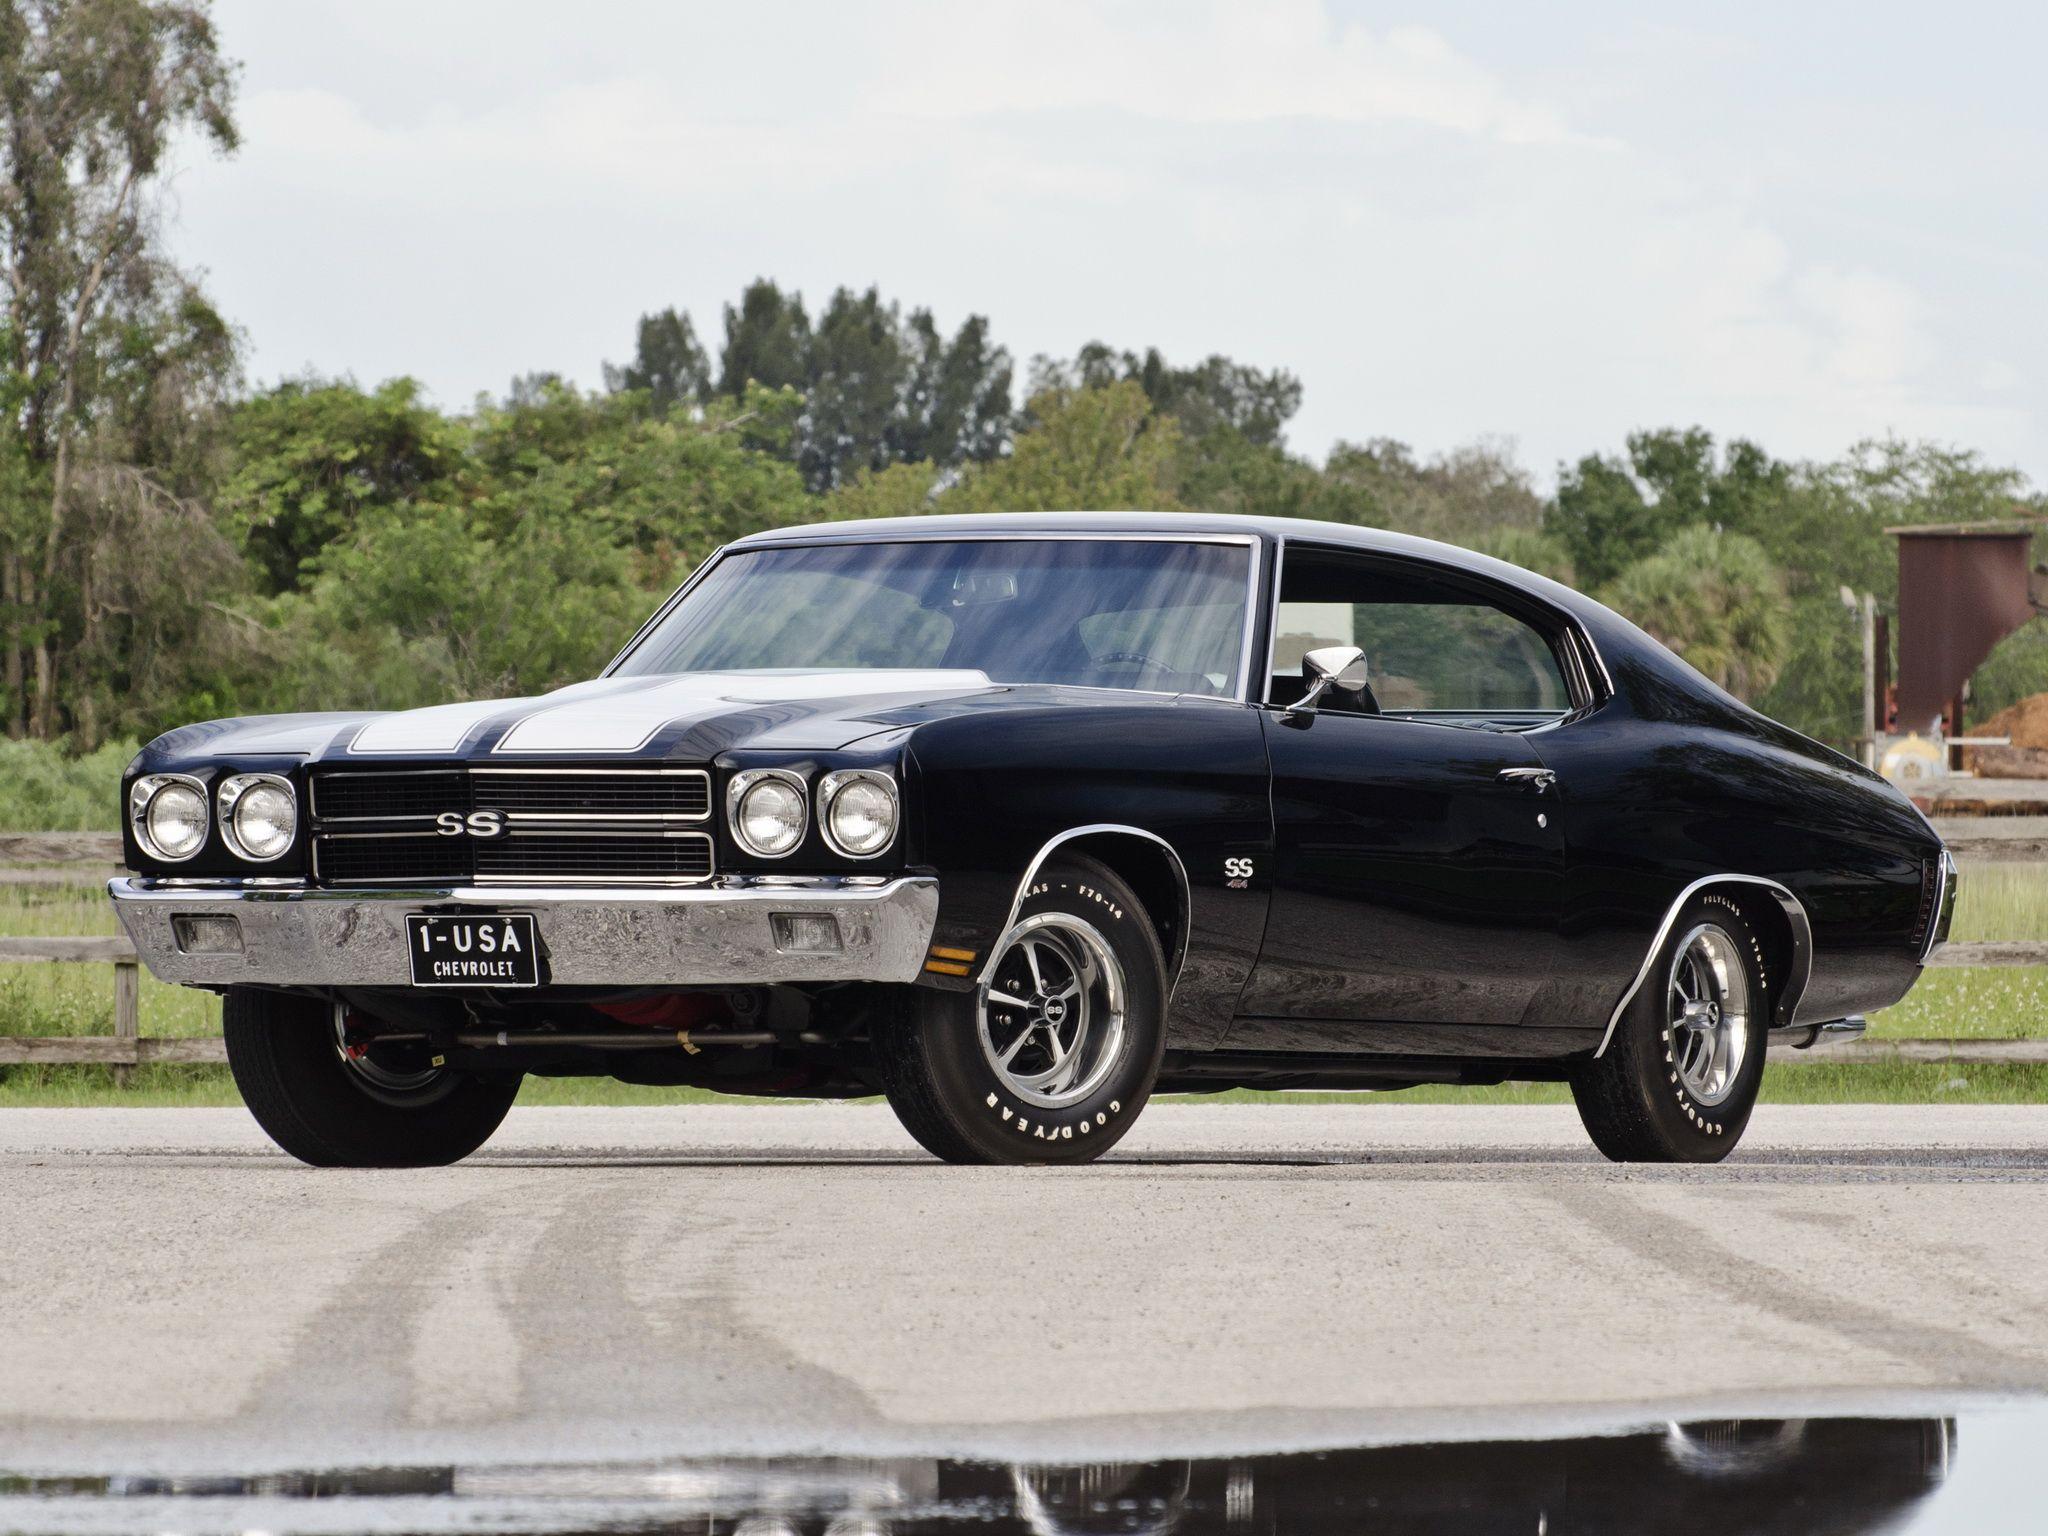 1970 Chevrolet Chevelle SS 454 LS6 Hardtop Coupe muscle classic s.